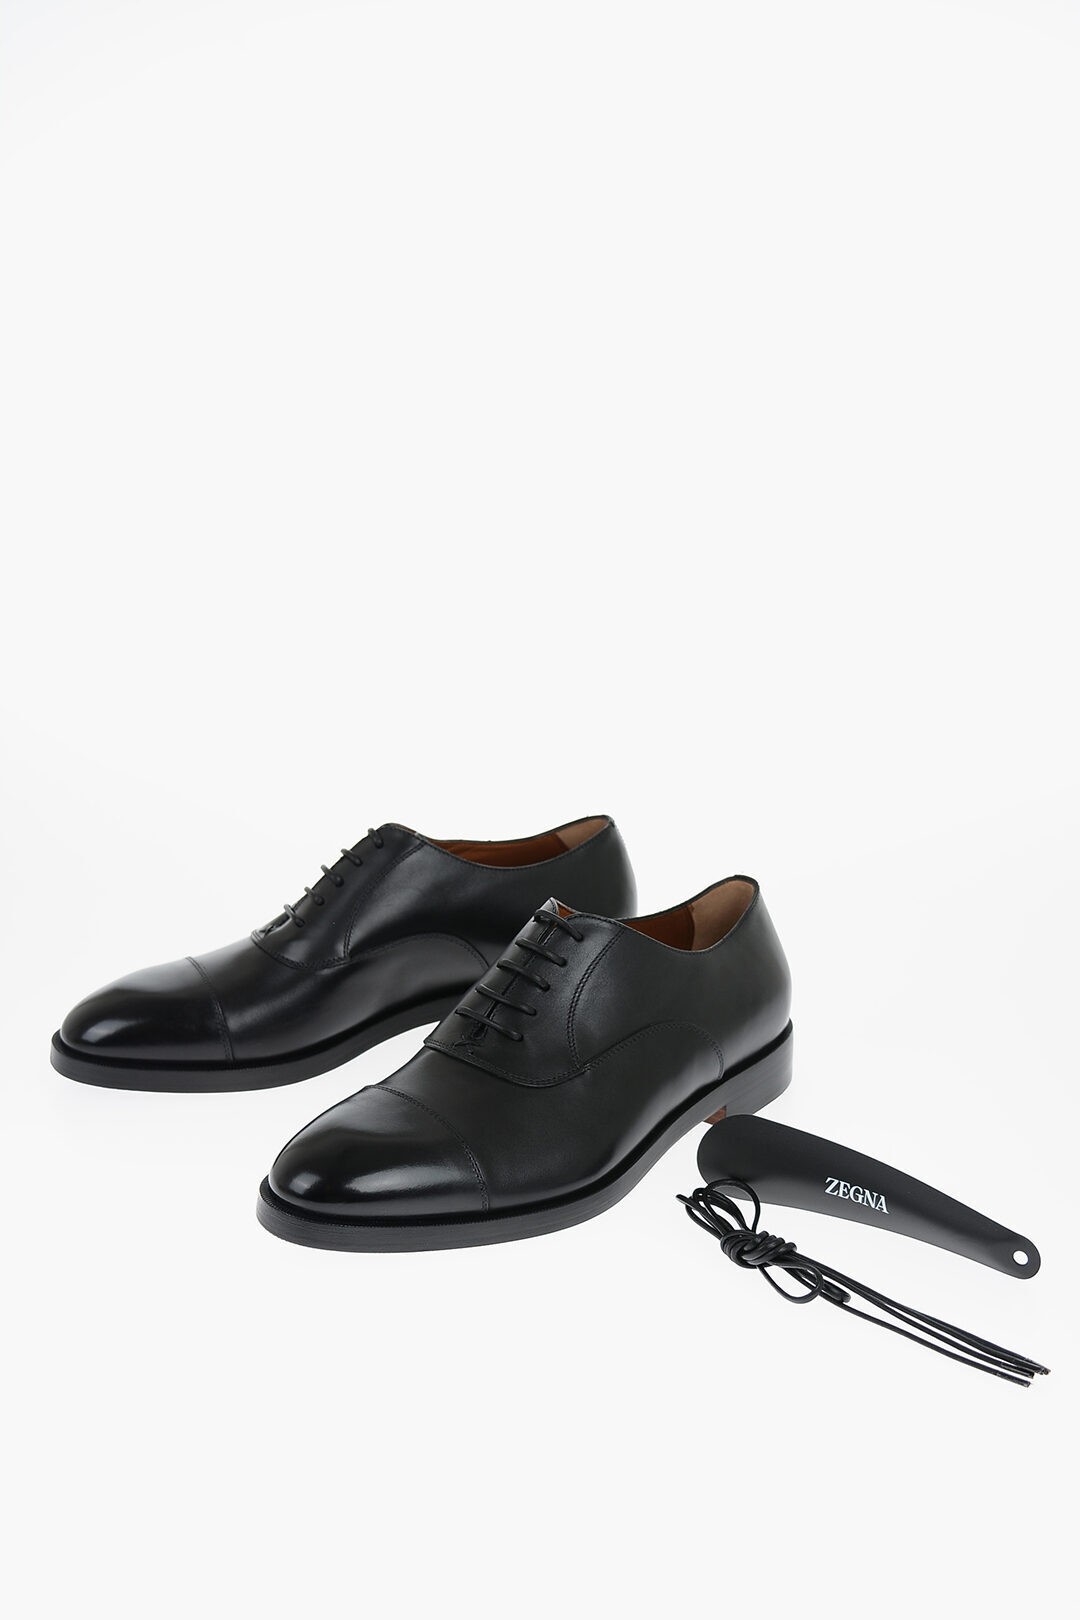 ZEGNA ゼニア ドレスシューズ LHCLG A5683Z NER メンズ LEATHER TORINO OXFORD SHOES 【関税 送料無料】【ラッピング無料】 dk